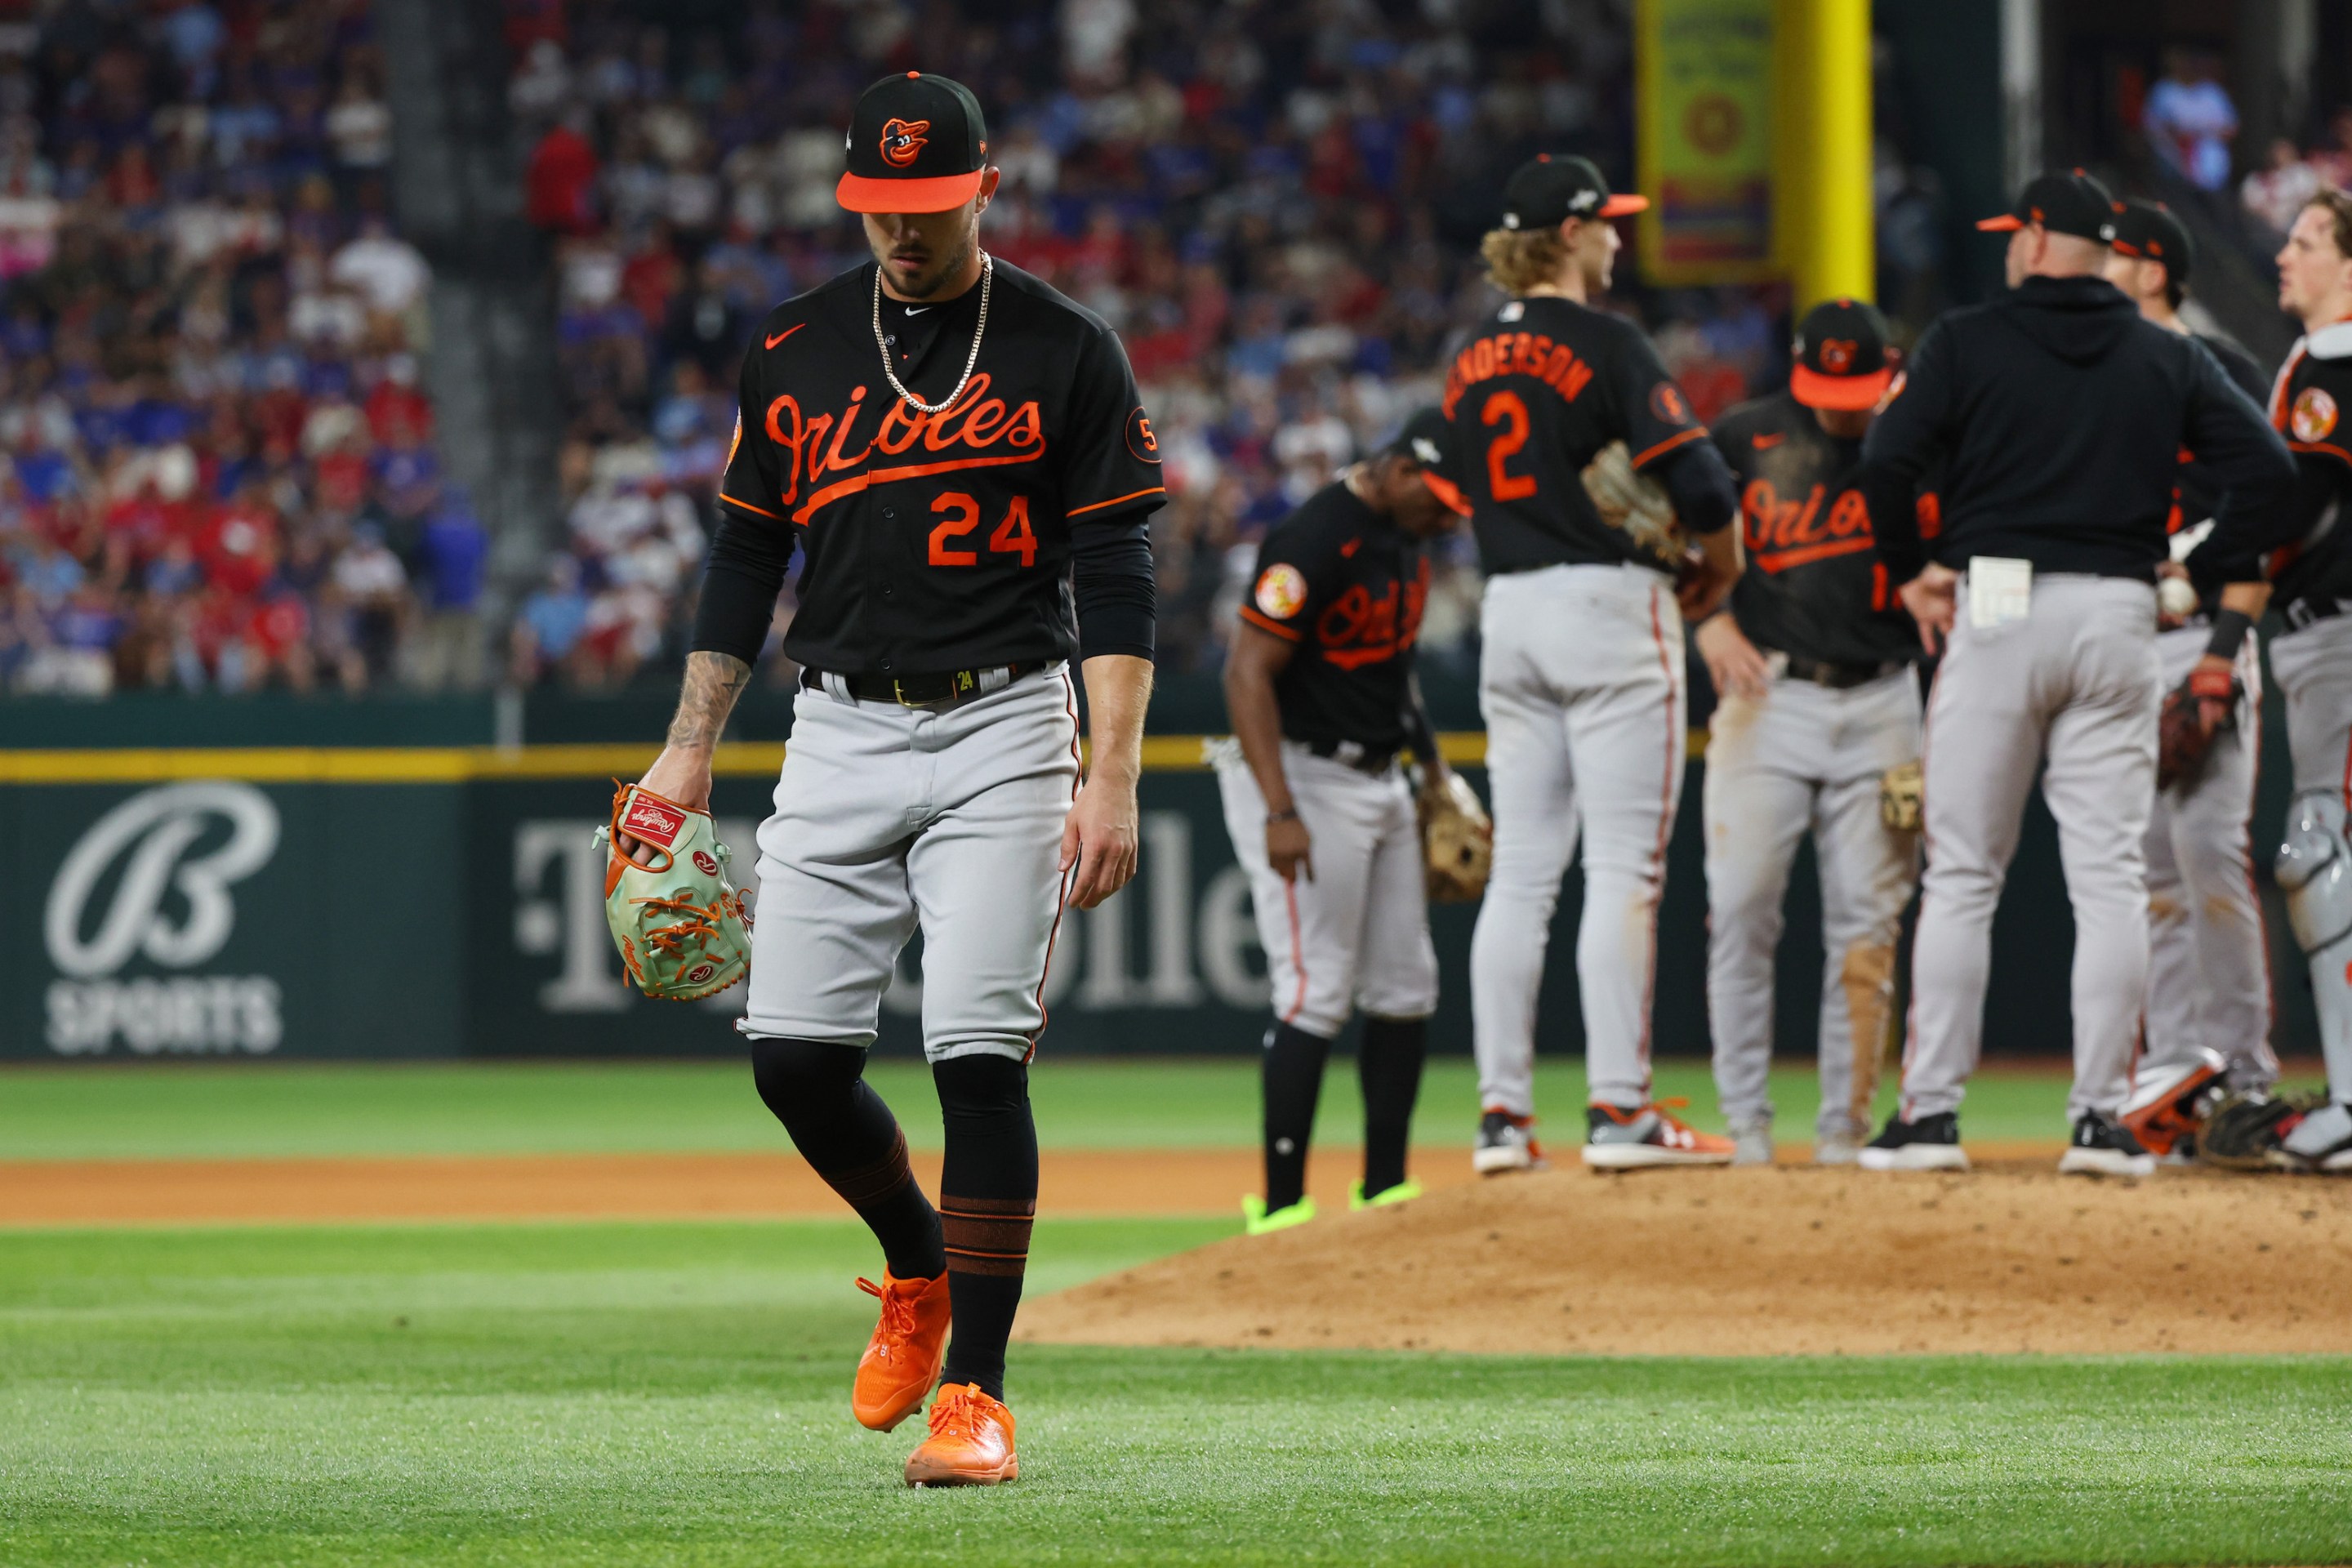 Orioles reliever DL Hall leaves the mound while his teammates wait for the reliever who will relieve him during the team's Game 3 loss in the American League Divisional Series.